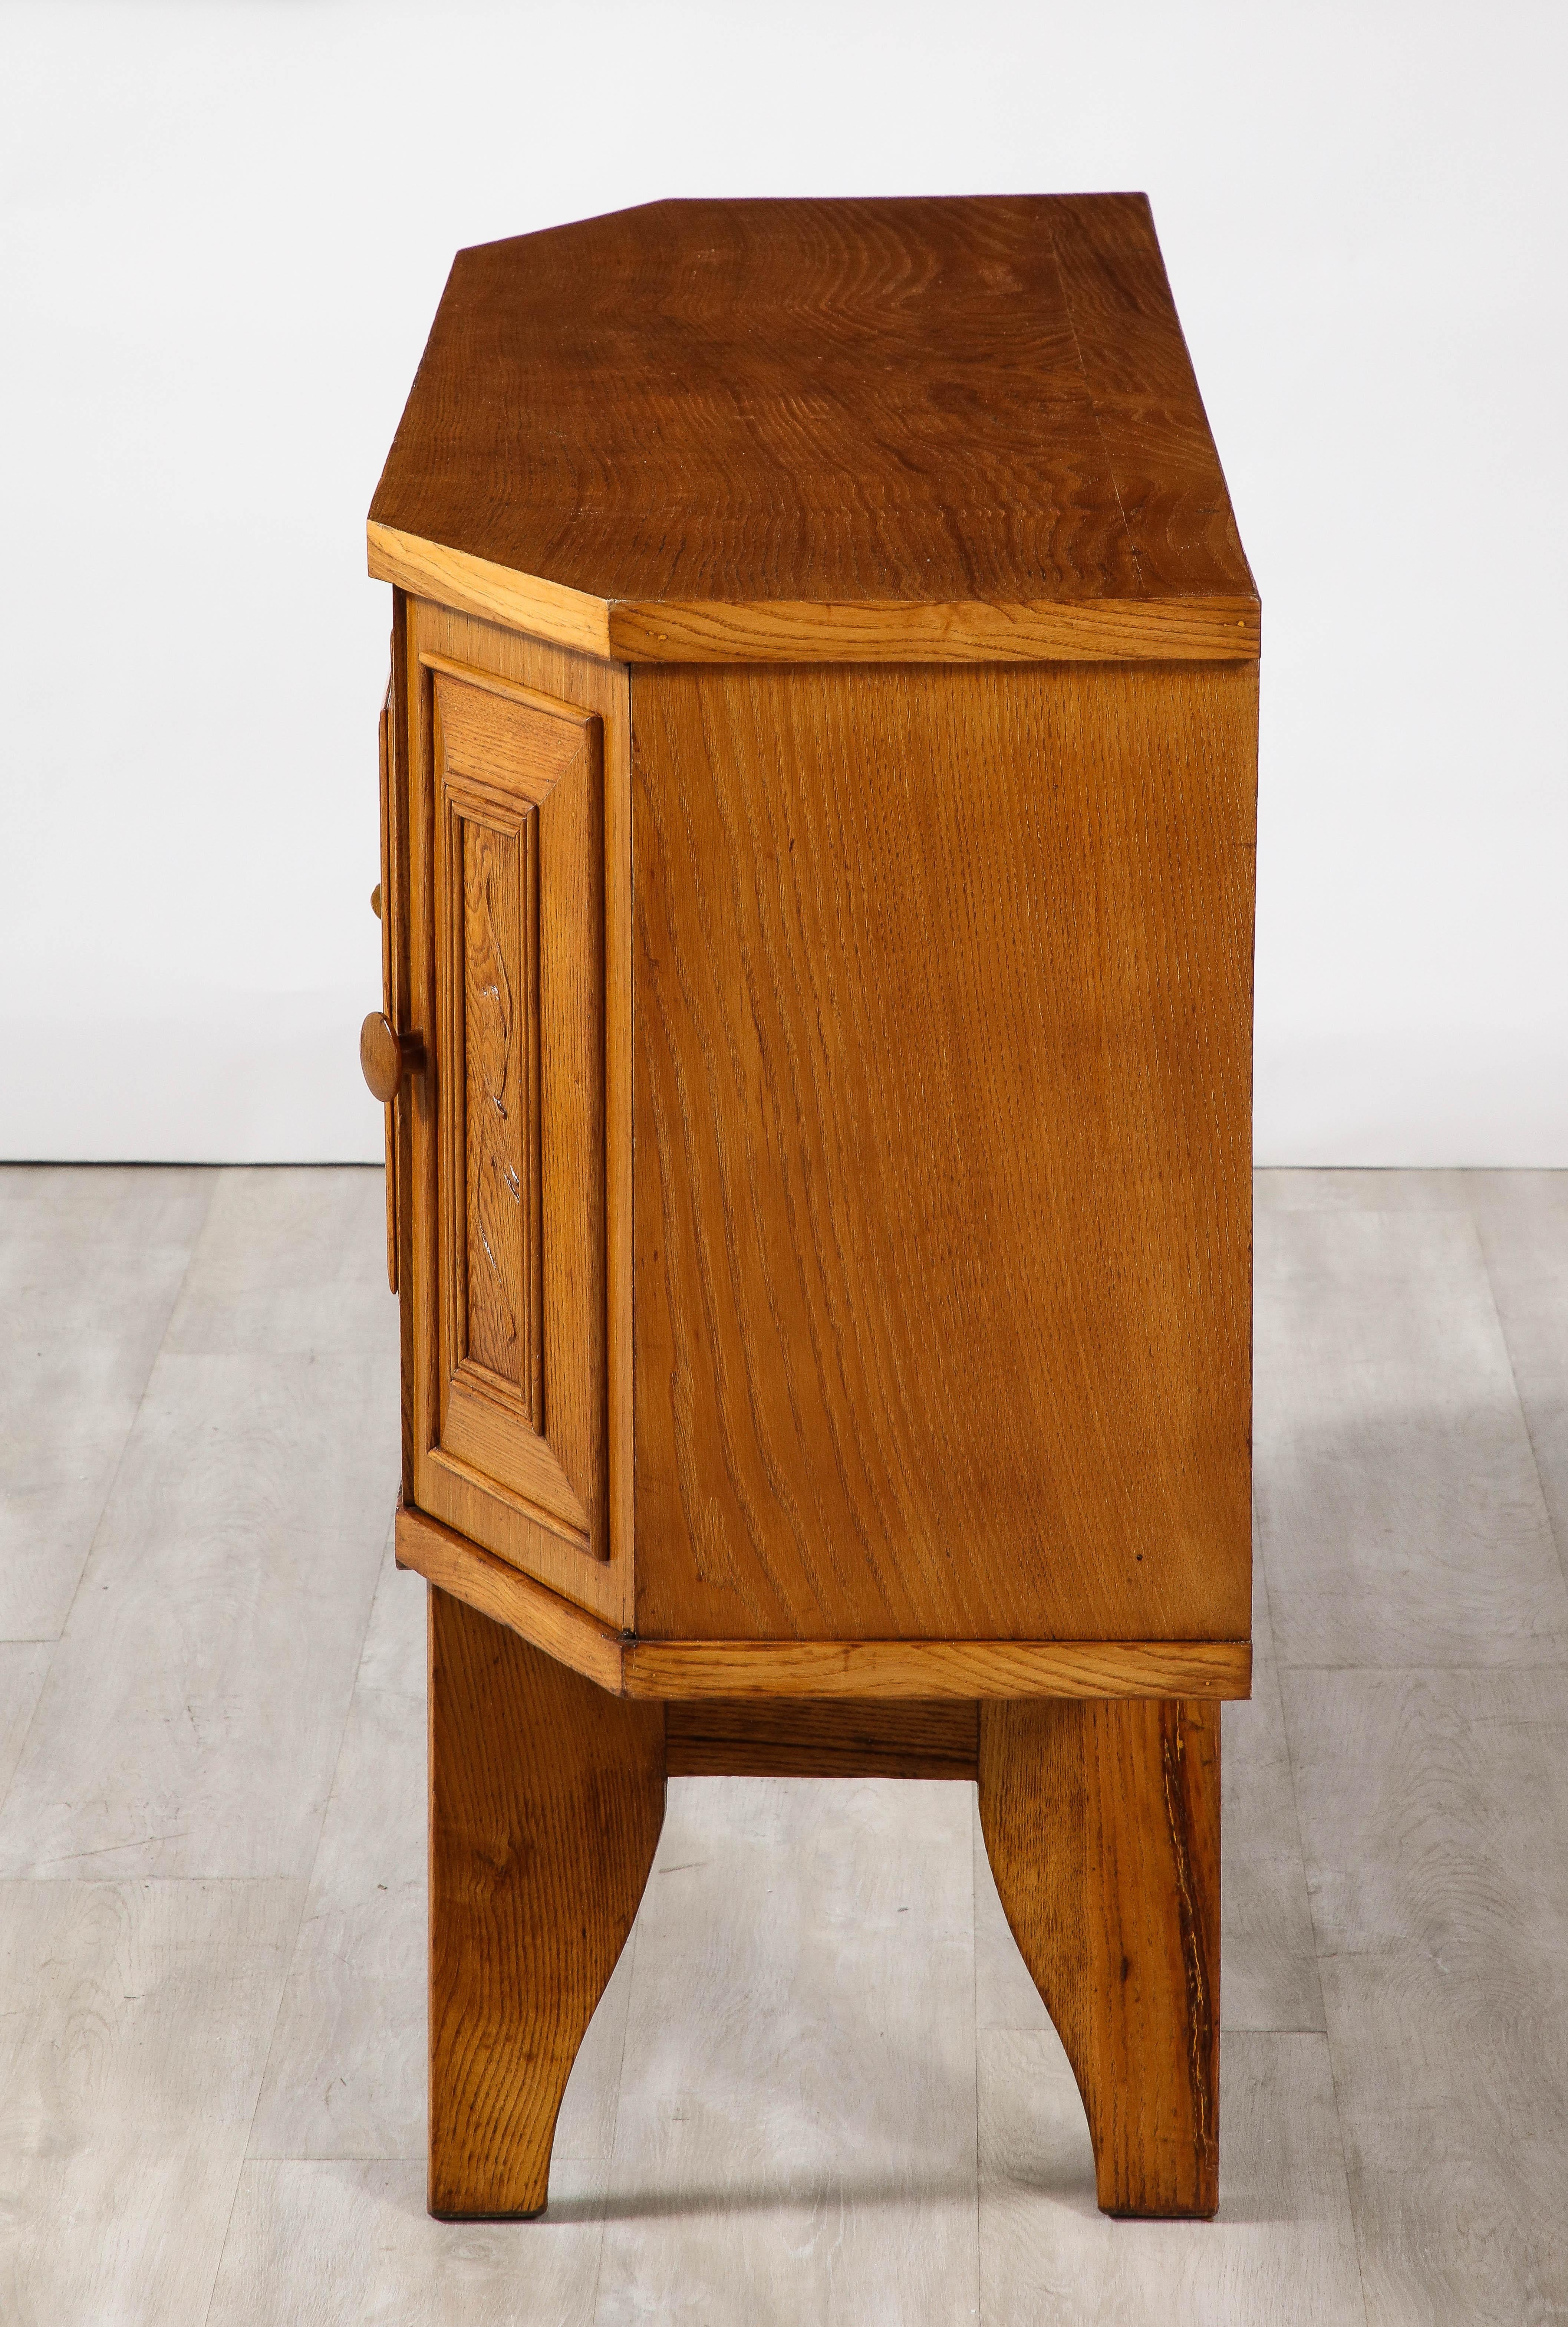 Italian Tuscan Art Deco Carved Oak Sideboard or Credenza, circa 1940 For Sale 3